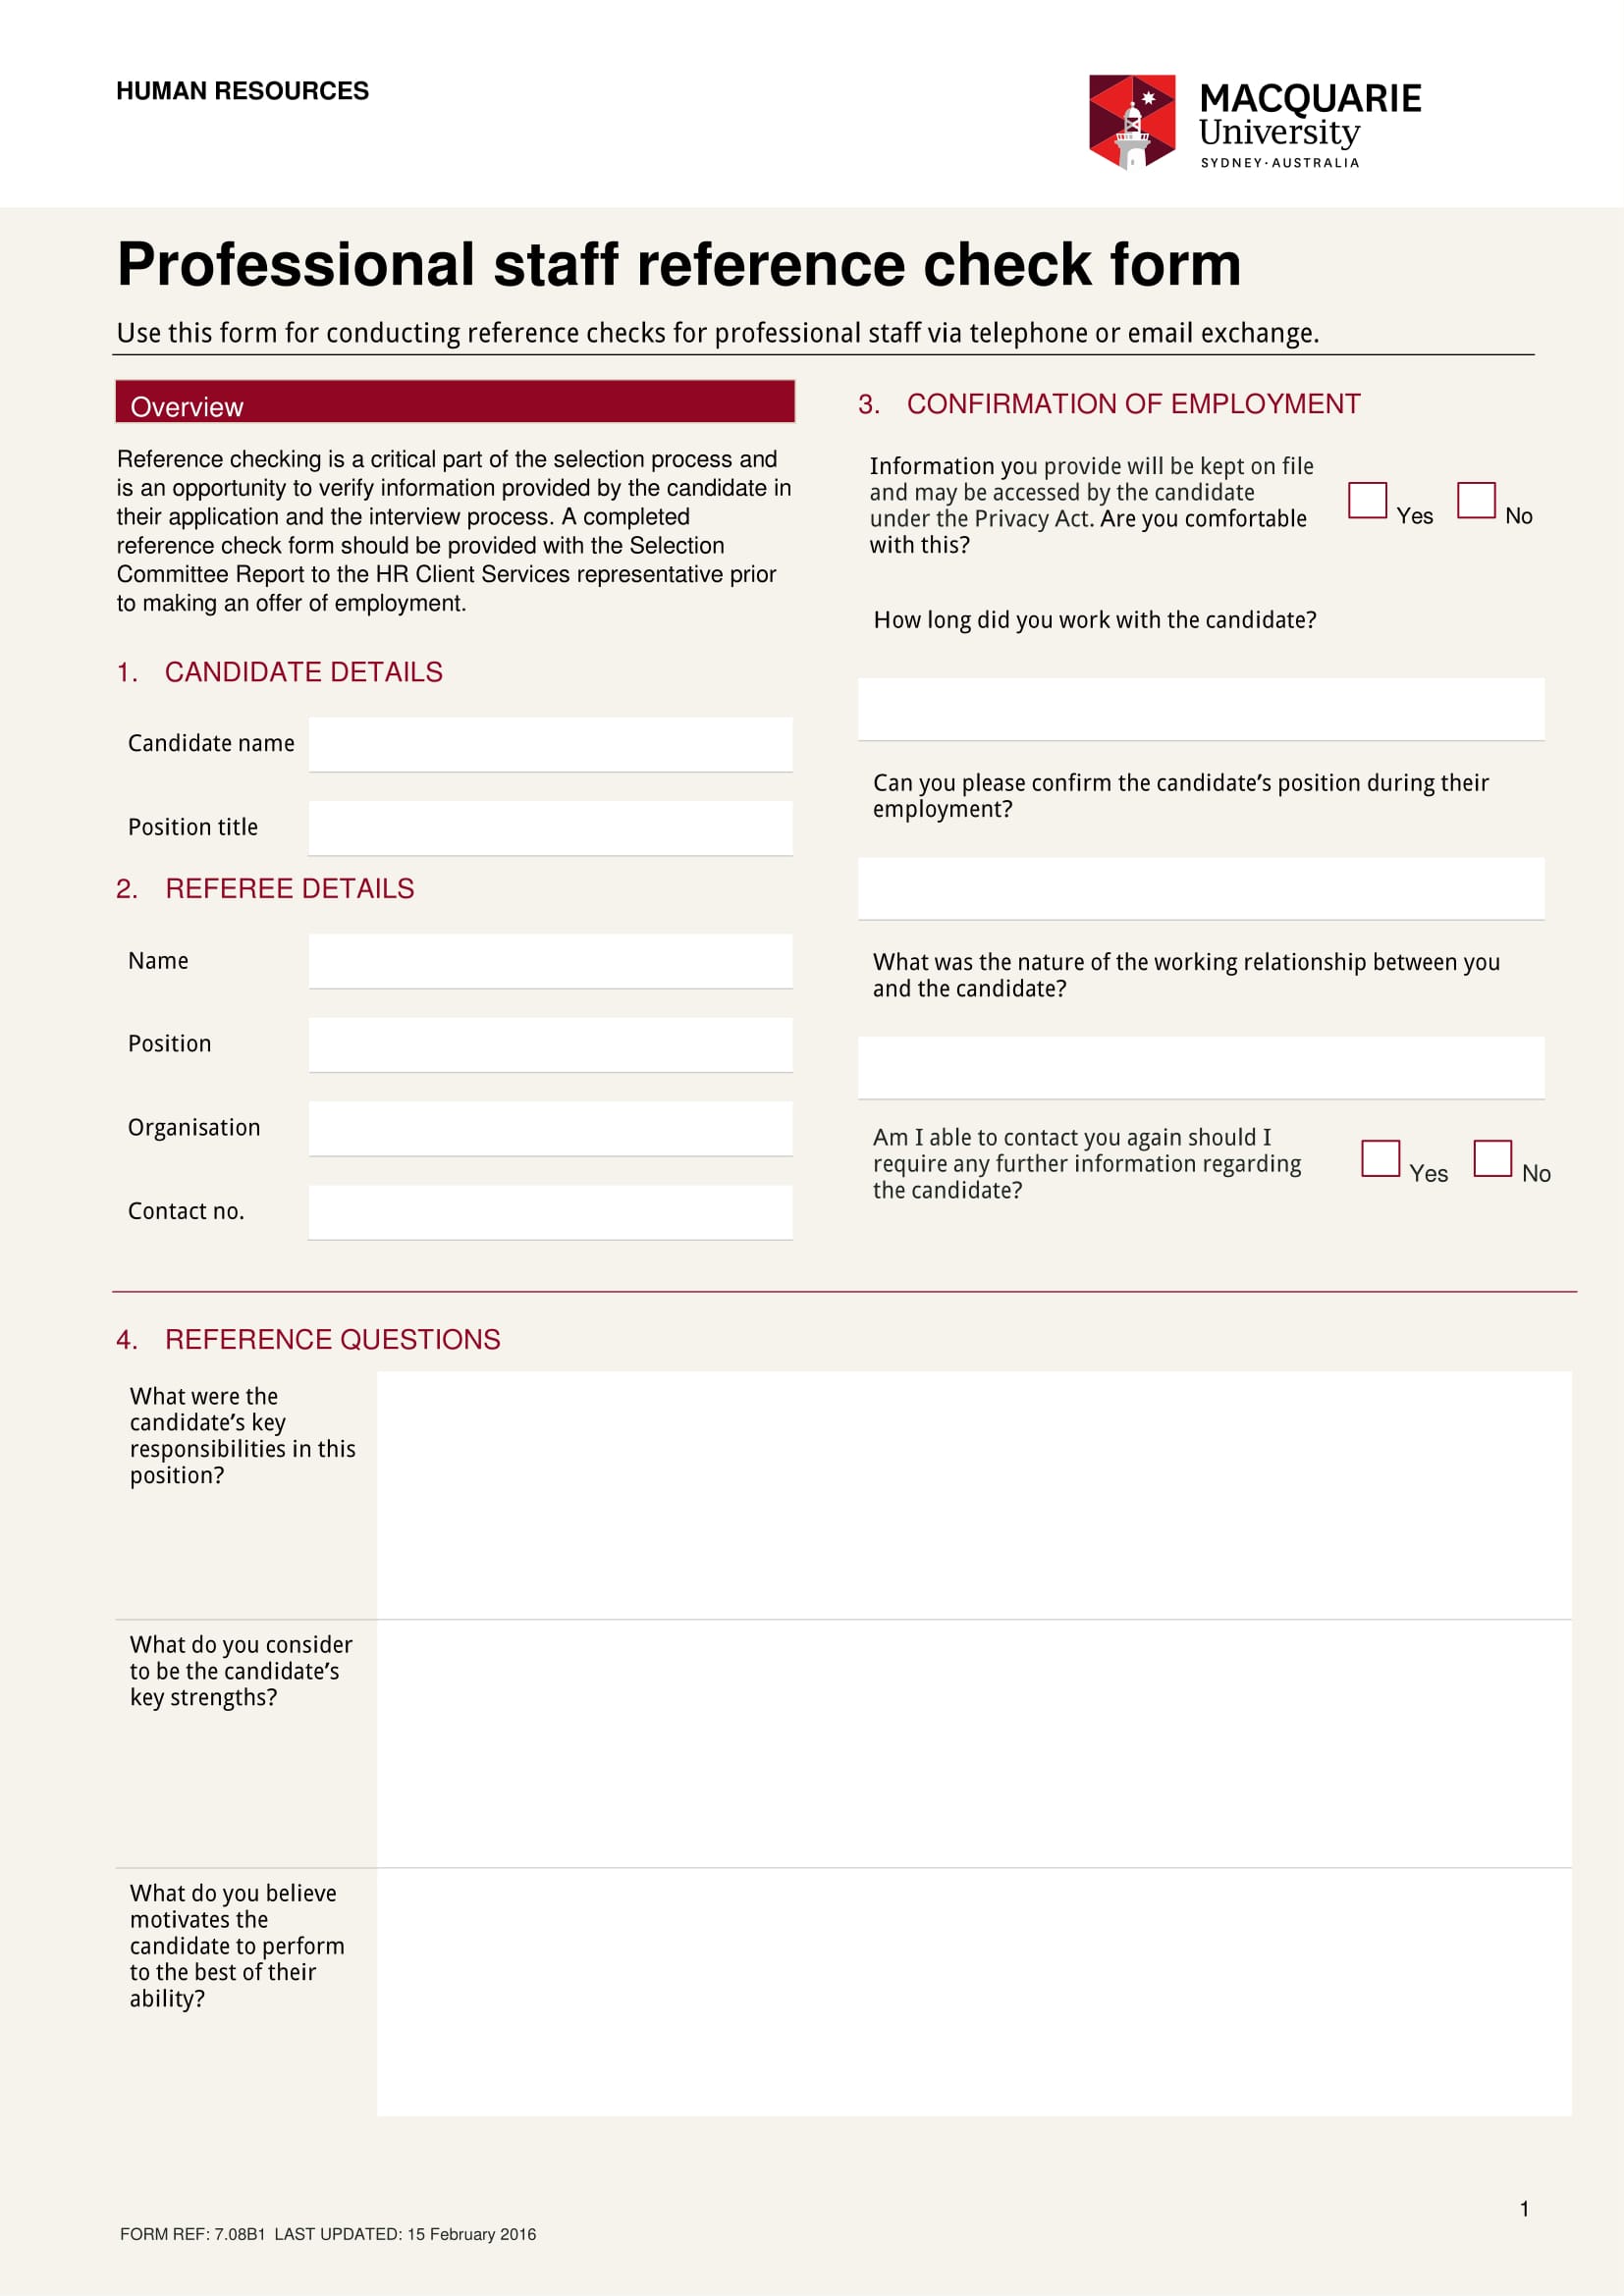 professional staff reference check form 1